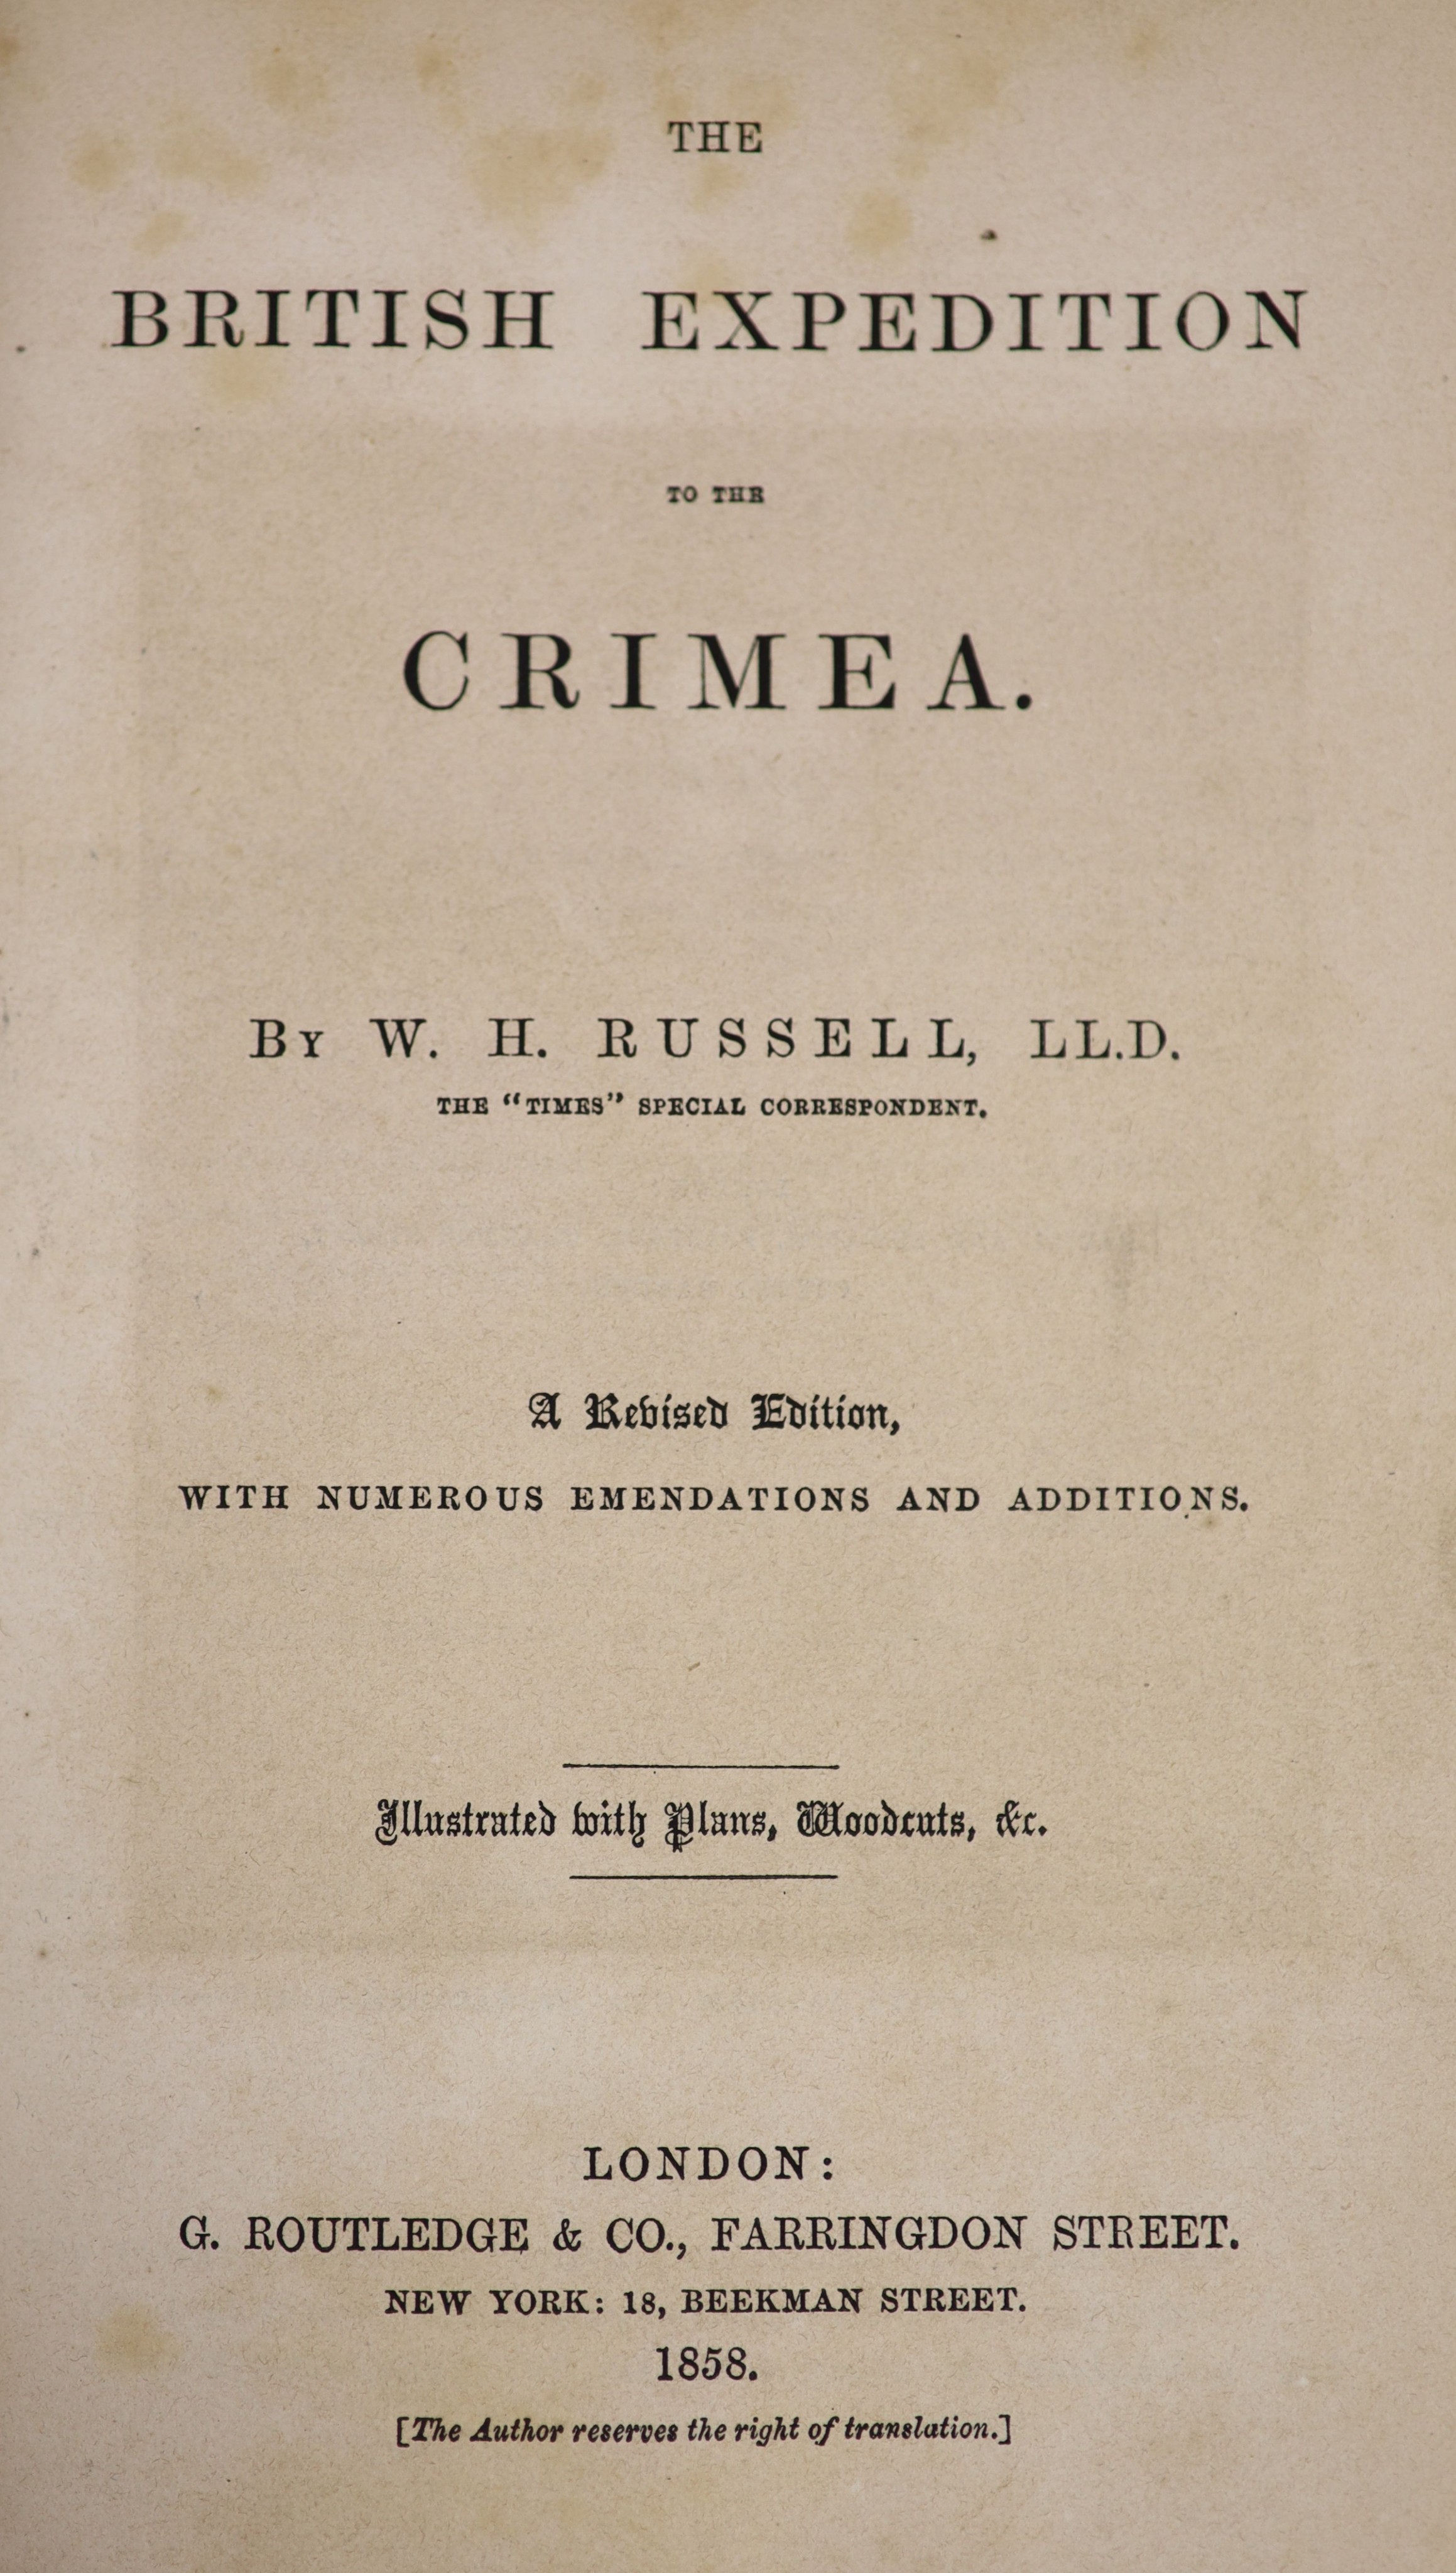 Russell, W.H. - The British Expedition to the Crimea. revised edition, with numerous emendations and additions. portrait, 3 wood engraved plates & 10 folded maps & plans